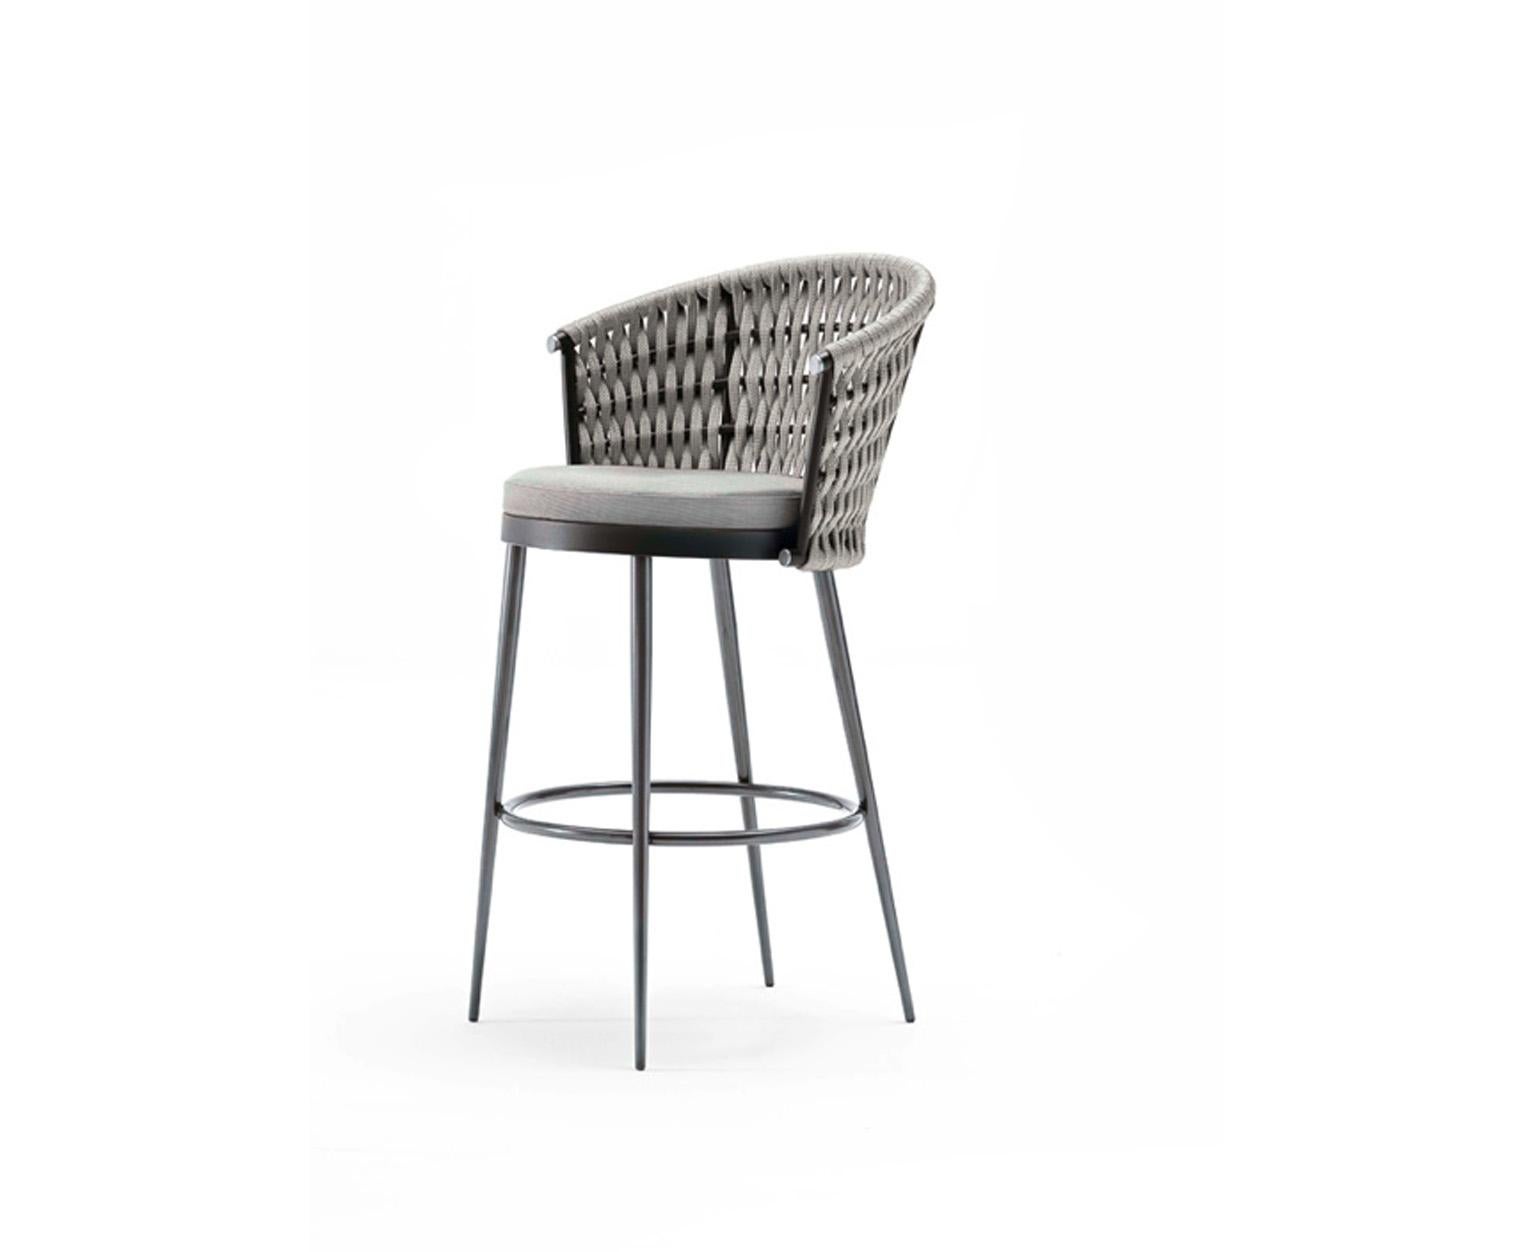 Hand-Crafted Giorgio Collection Dune Outdoor Garden Bar Stool Light Grey For Sale